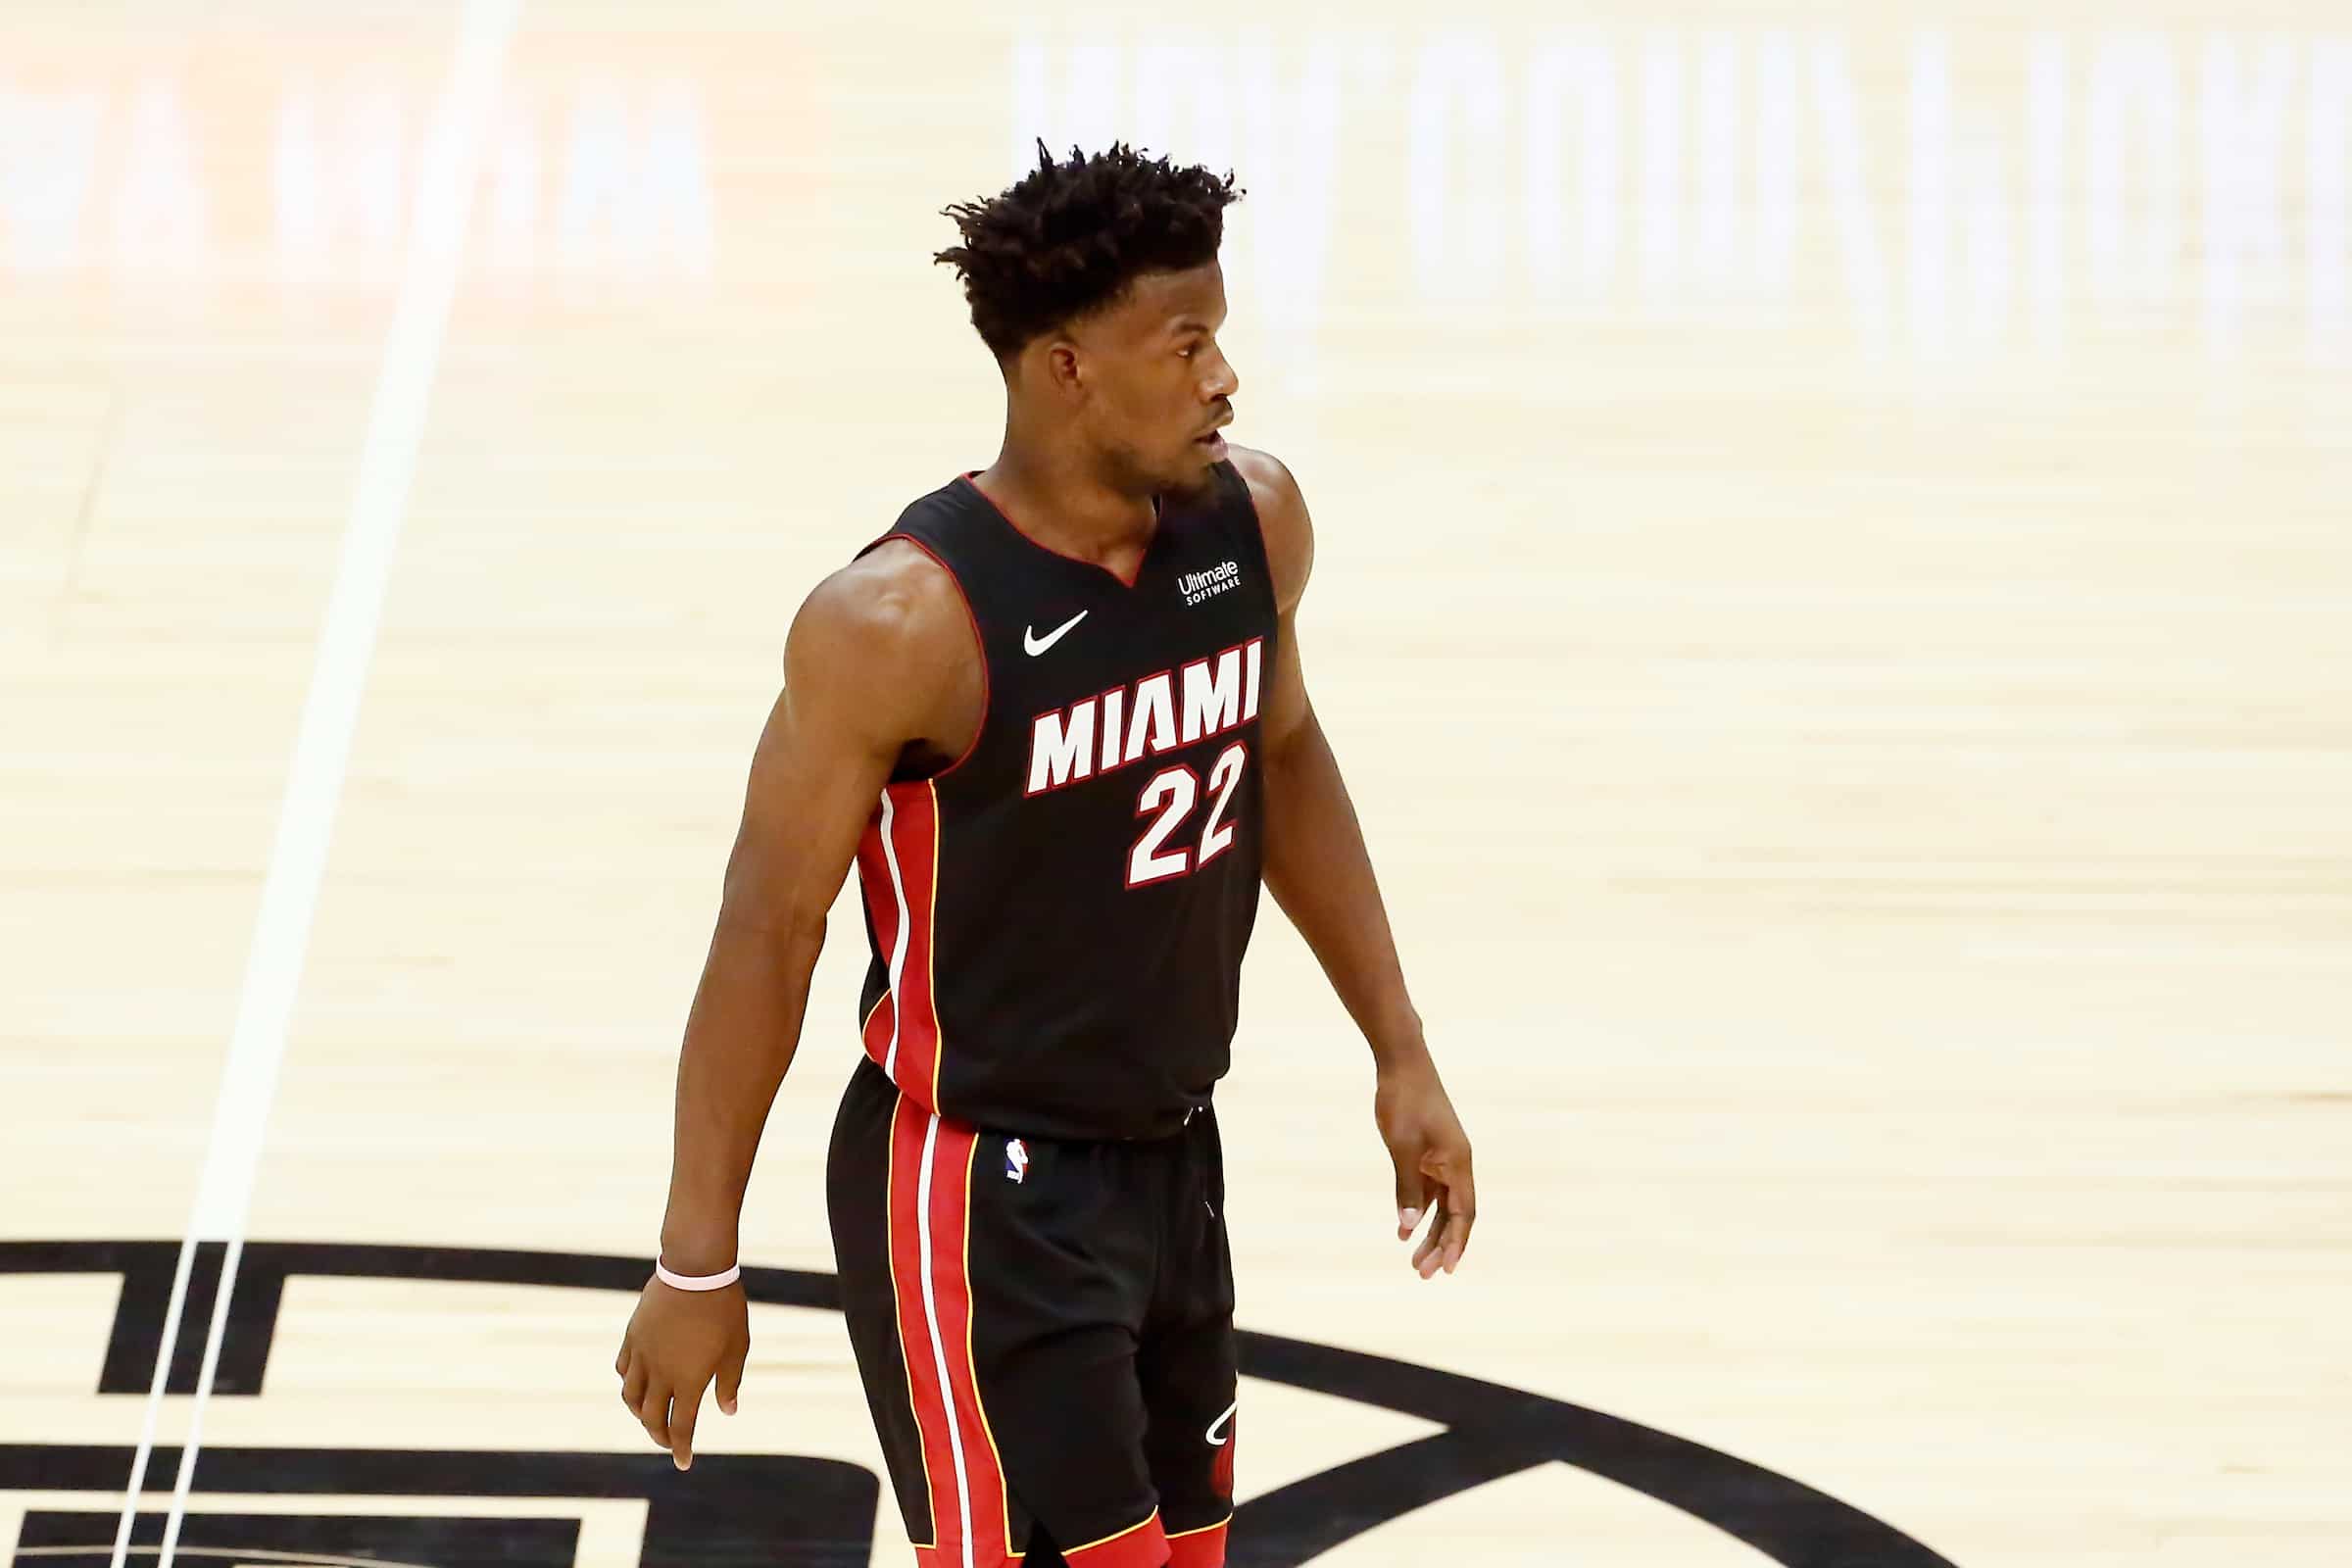 Previews playoffs NBA : Indiana Pacers (4) vs Miami Heat (5)